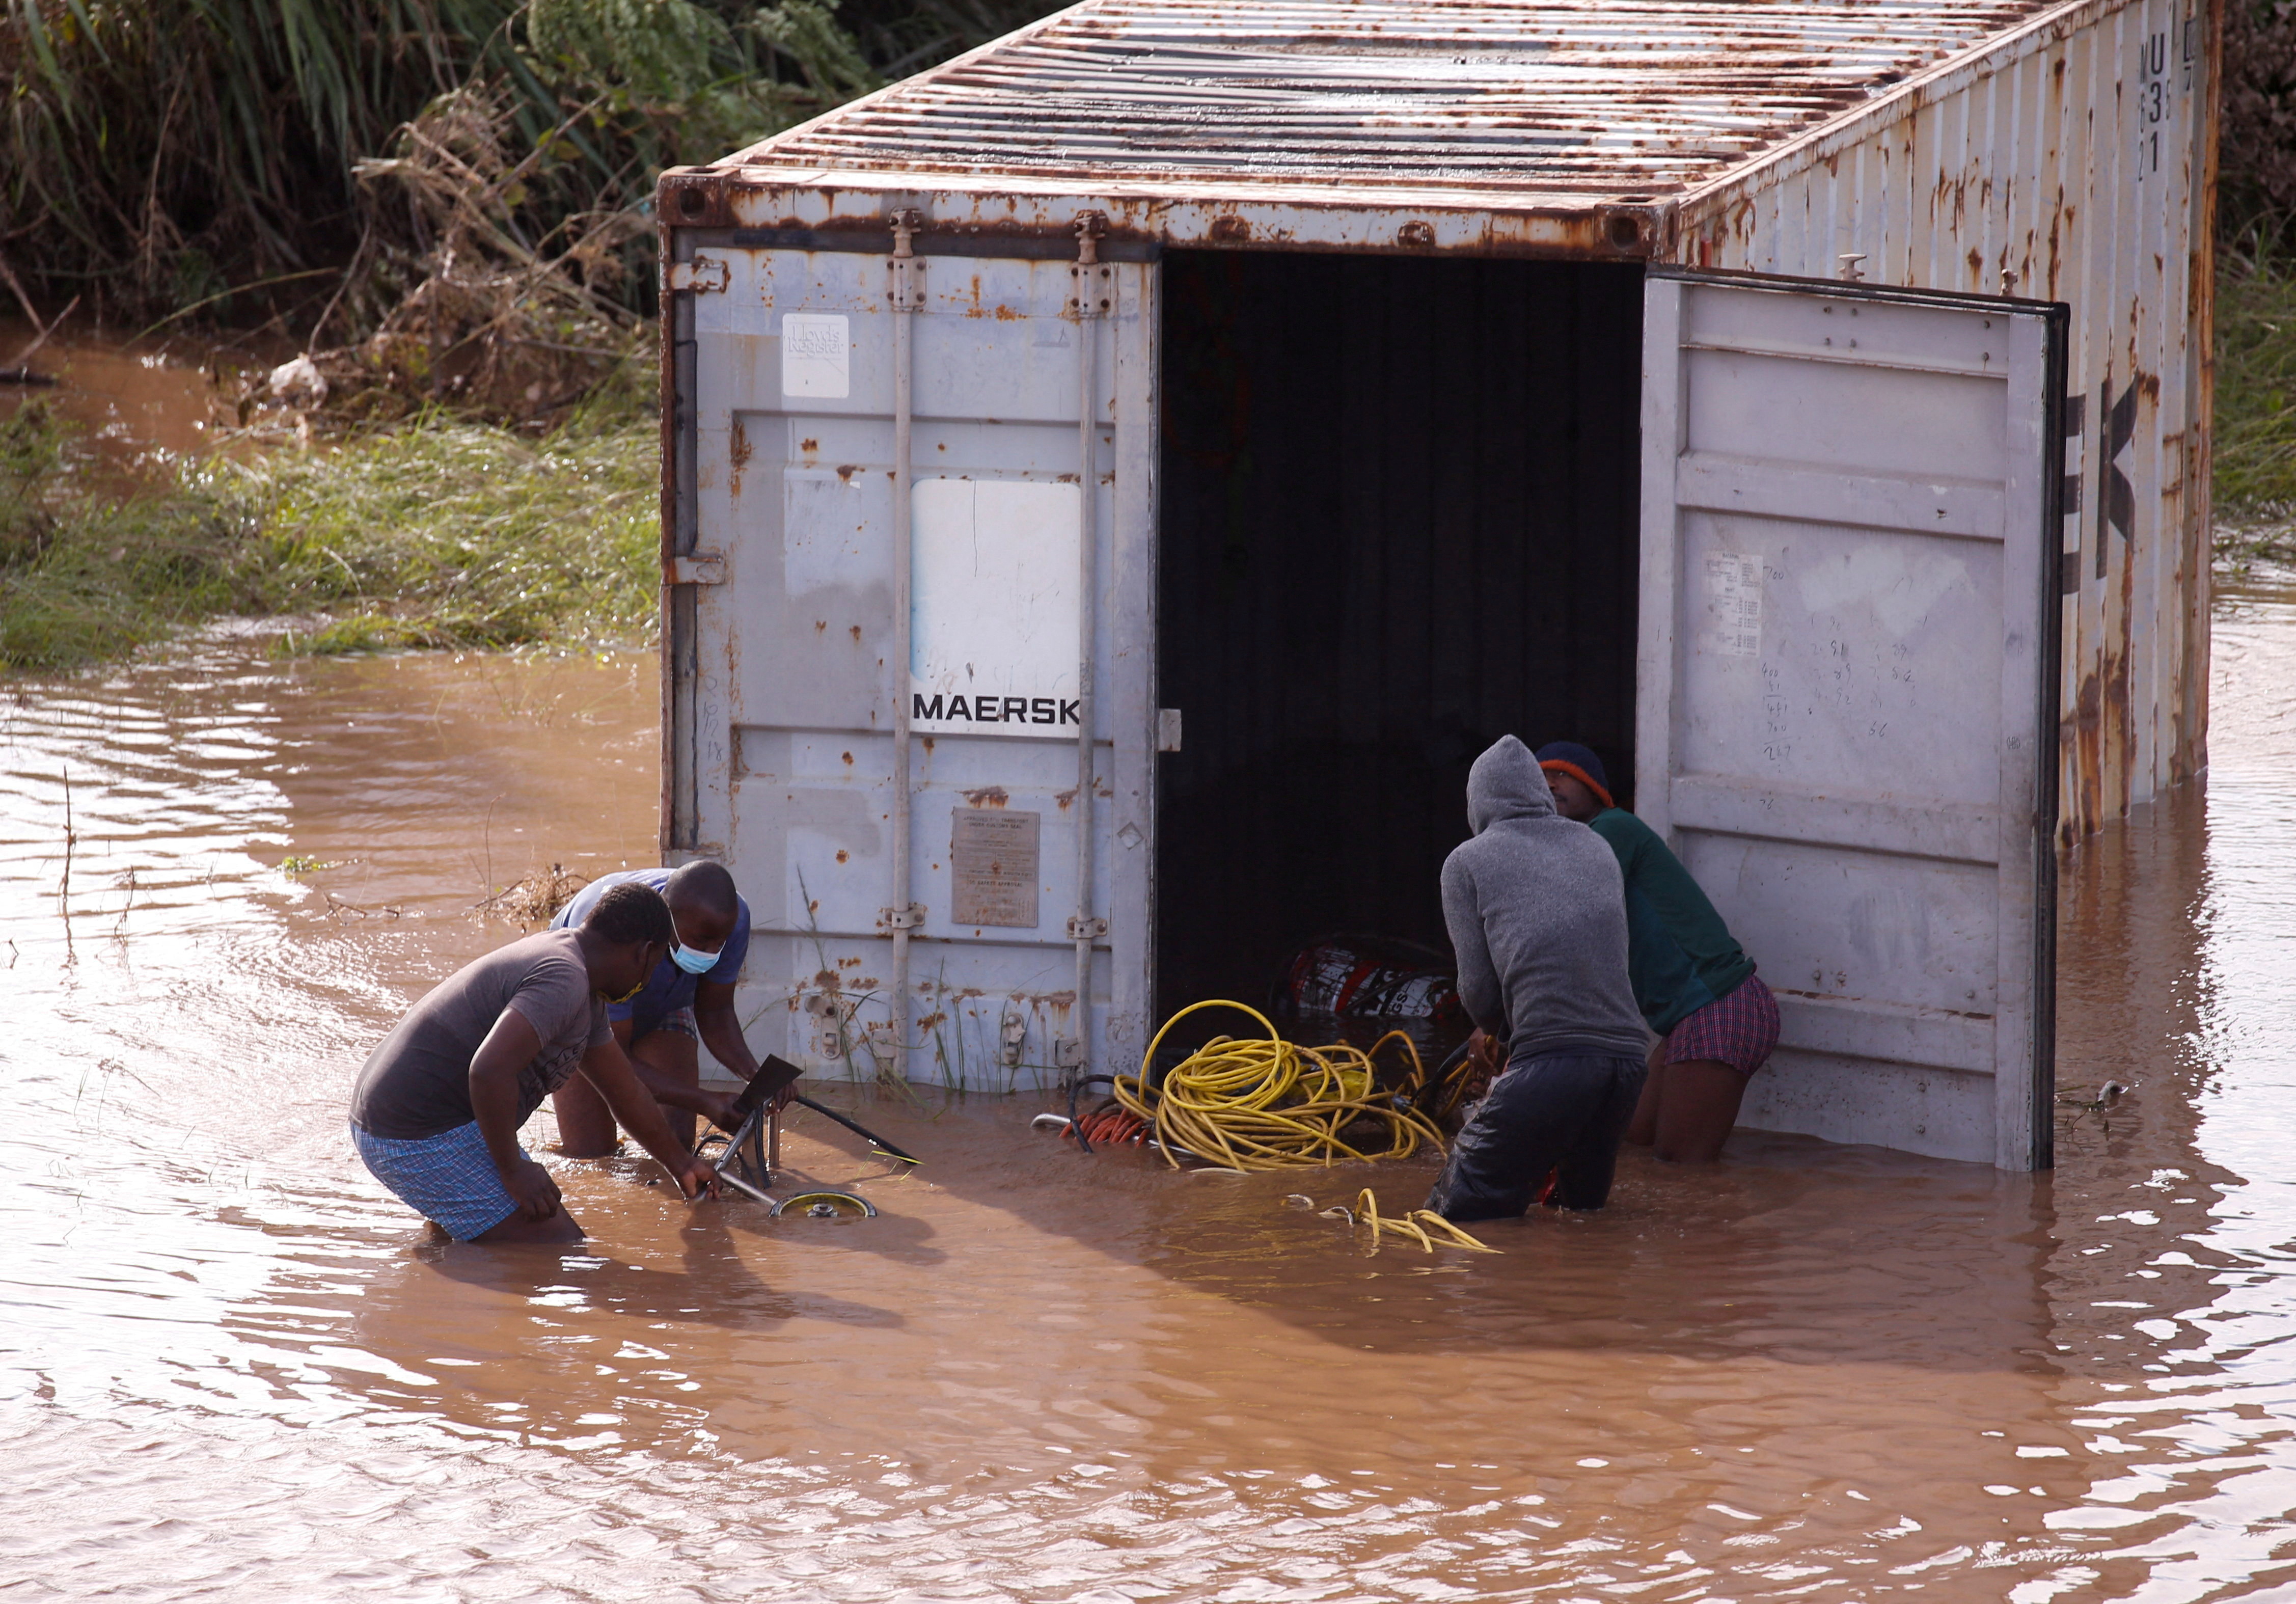 People loot a shipping container which was washed away after heavy rains caused flooding, in Durban